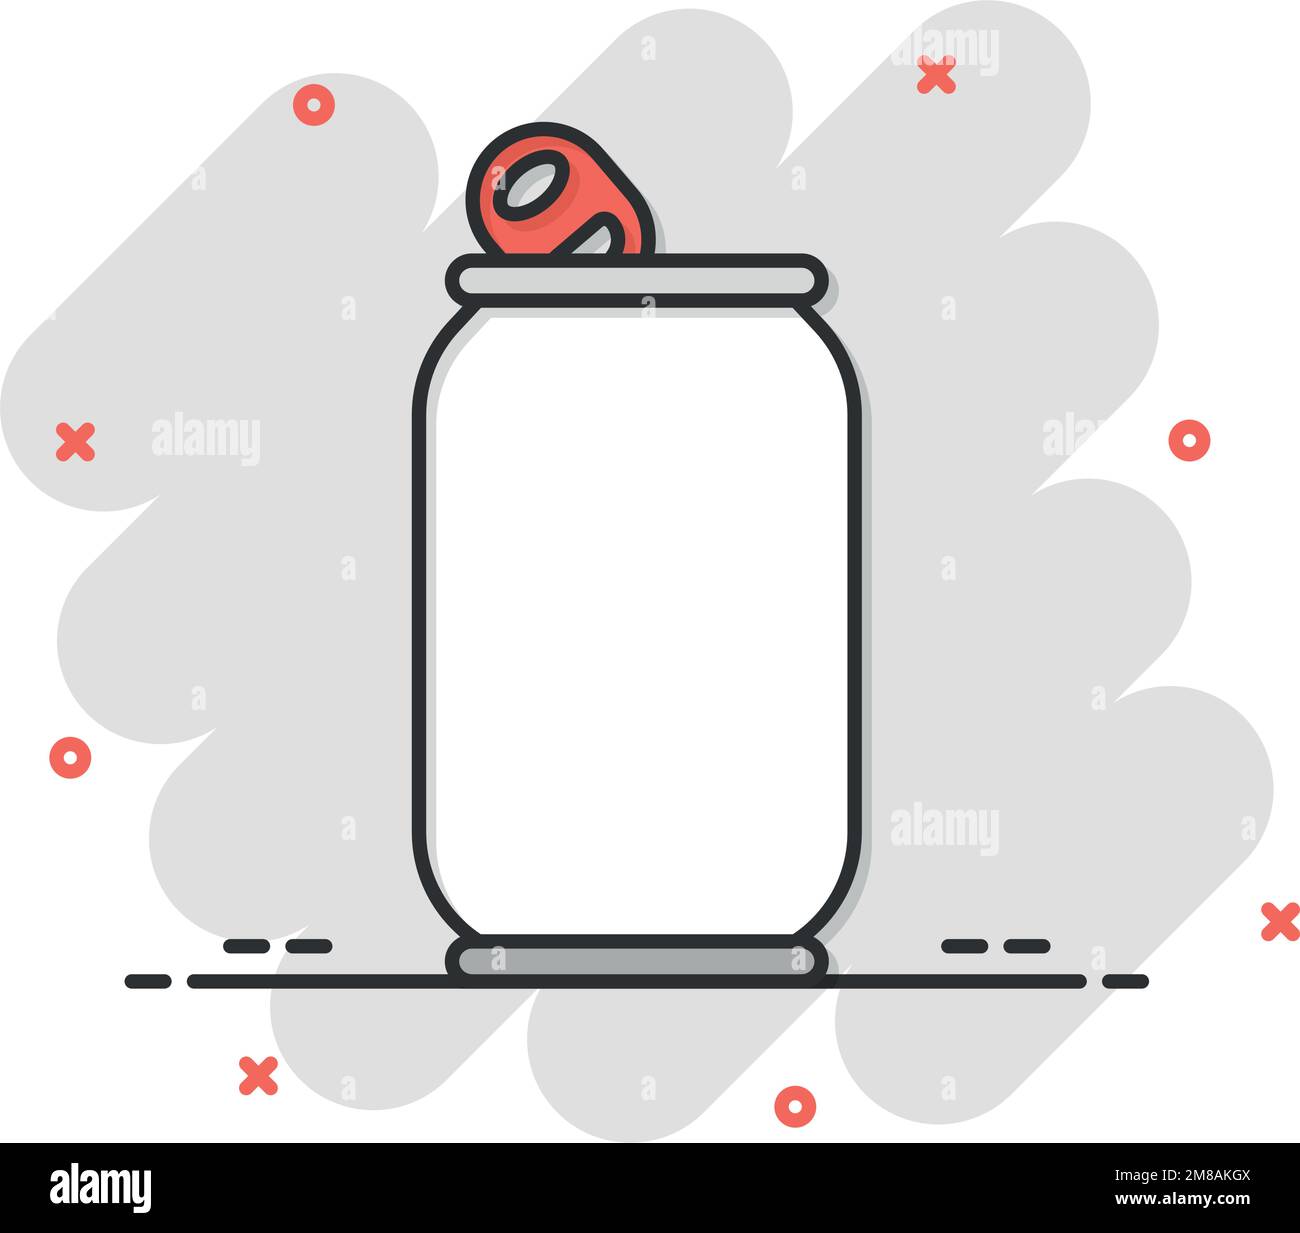 Soda can icon in comic style. Drink bottle cartoon vector illustration on isolated background. Beverage splash effect sign business concept. Stock Vector